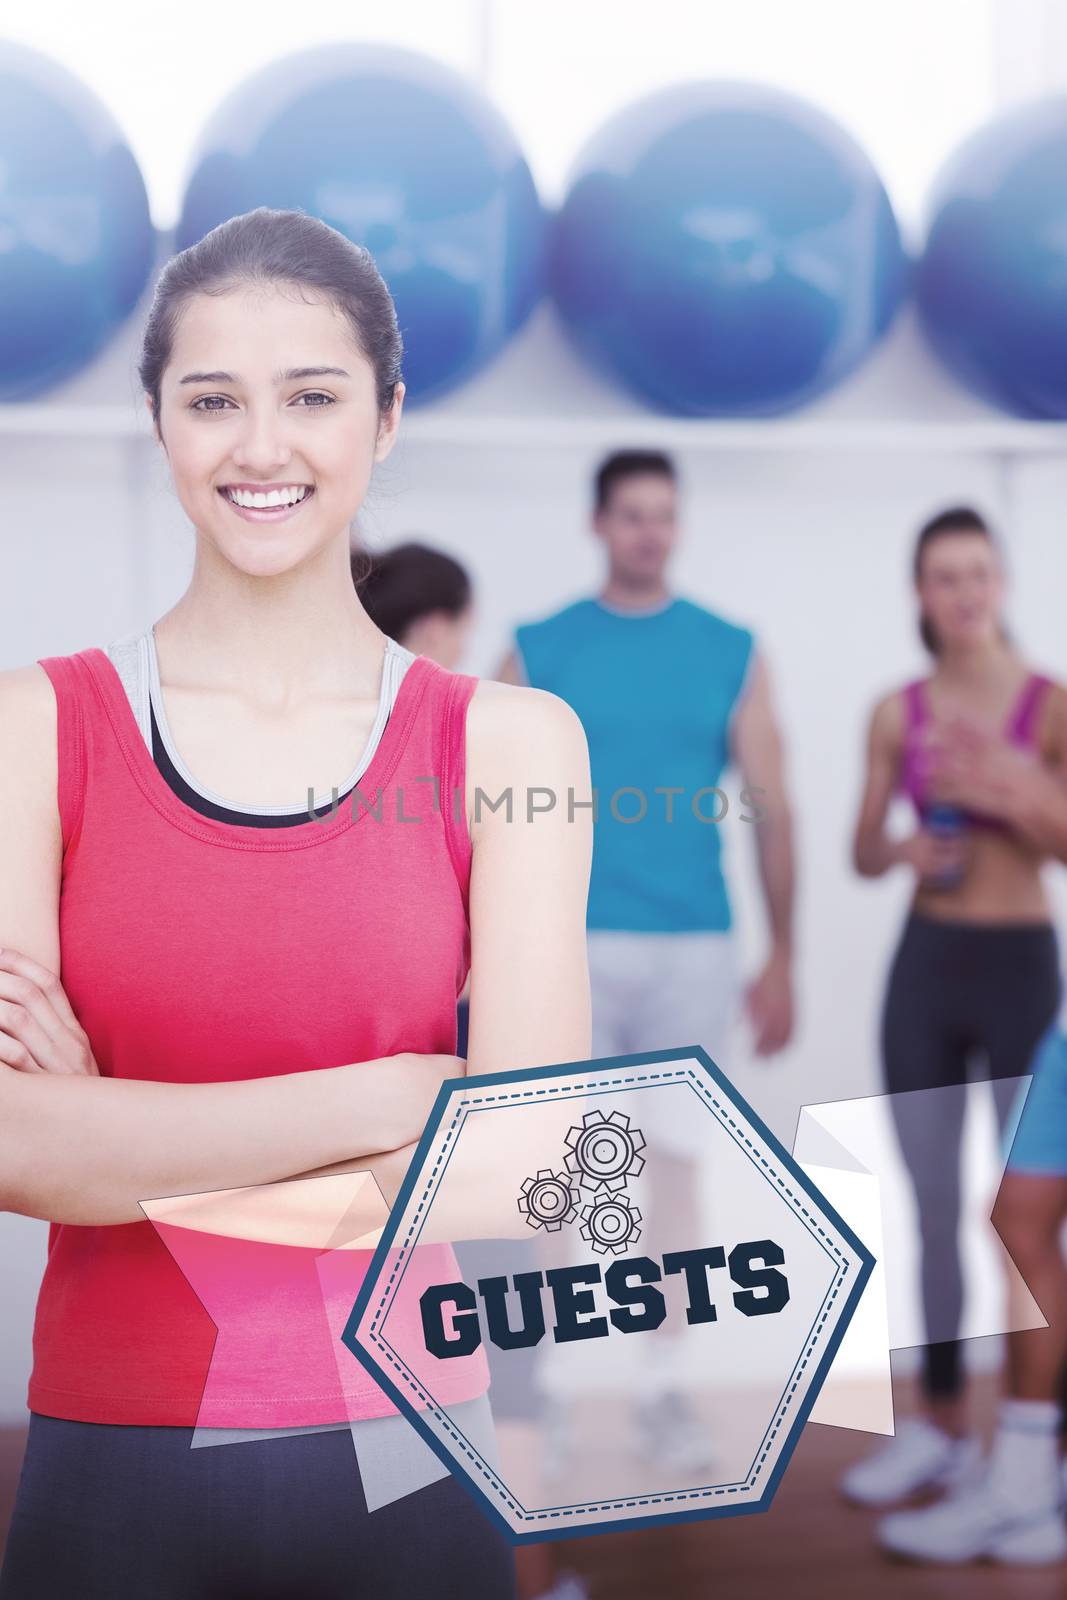 The word guests and smiling woman with friends in background at fitness studio against hexagon